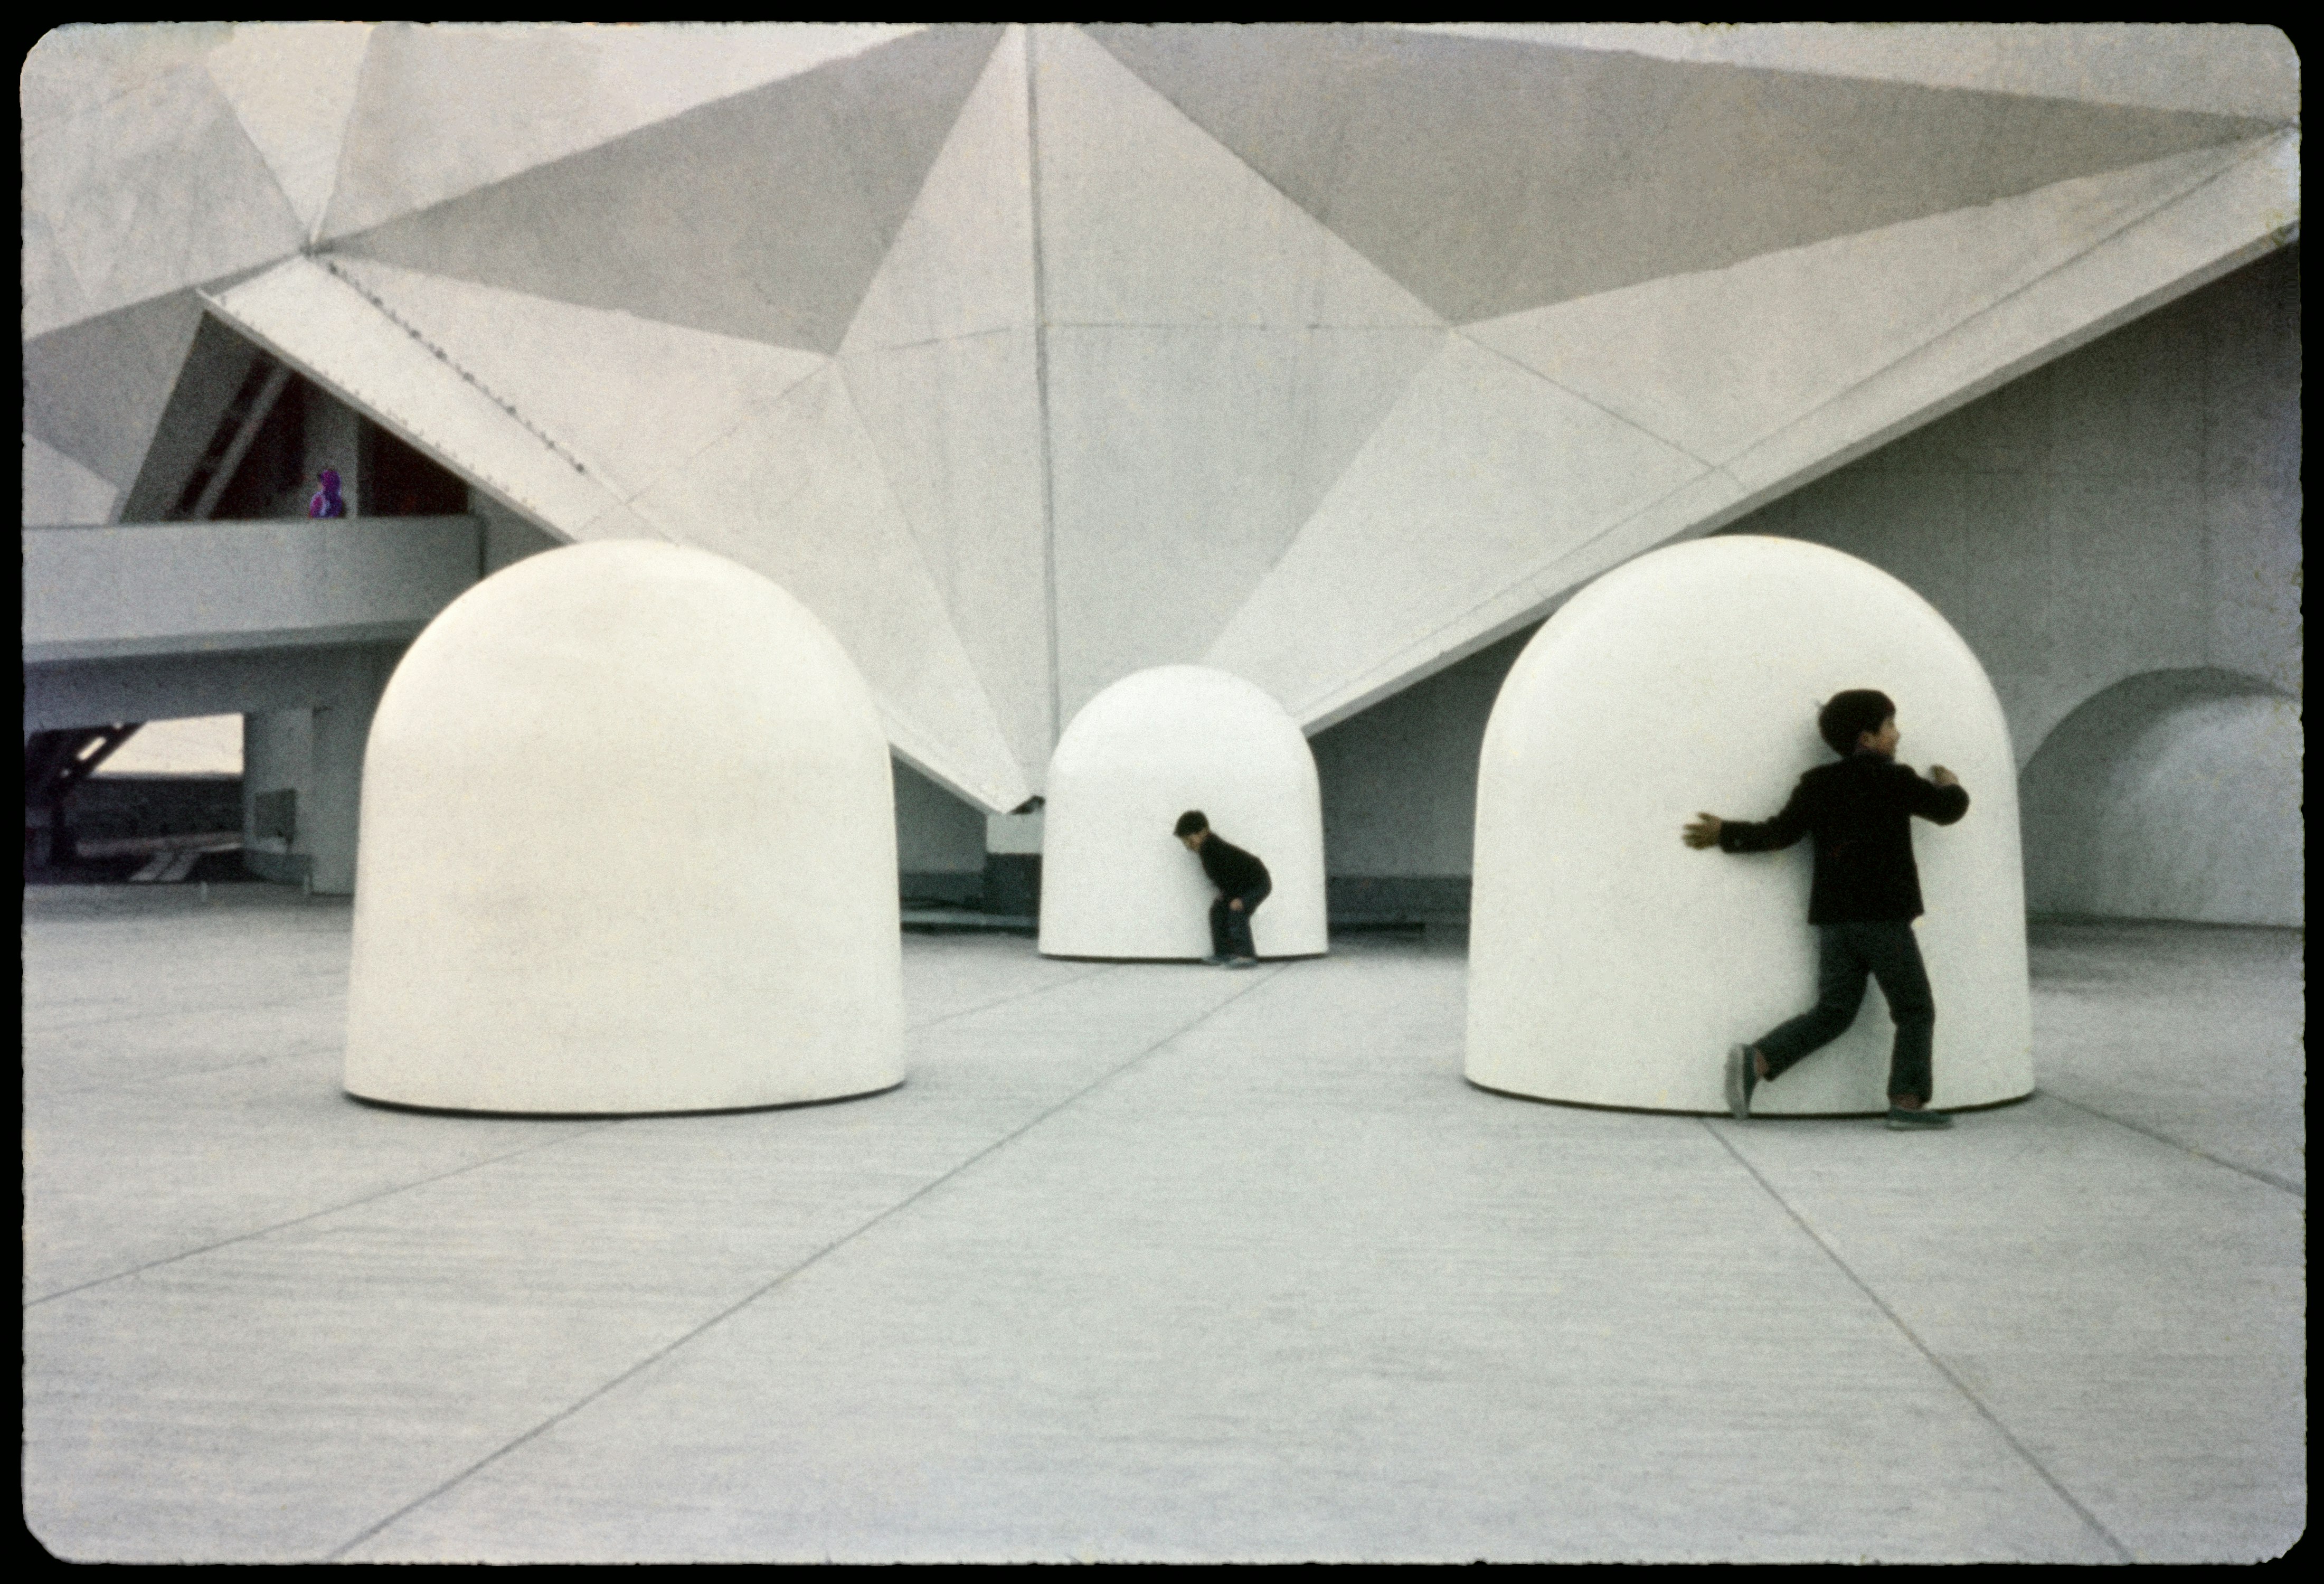 A photograph of large white domes on a concrete floor. Two figures in black crouch in front of two of the domes.